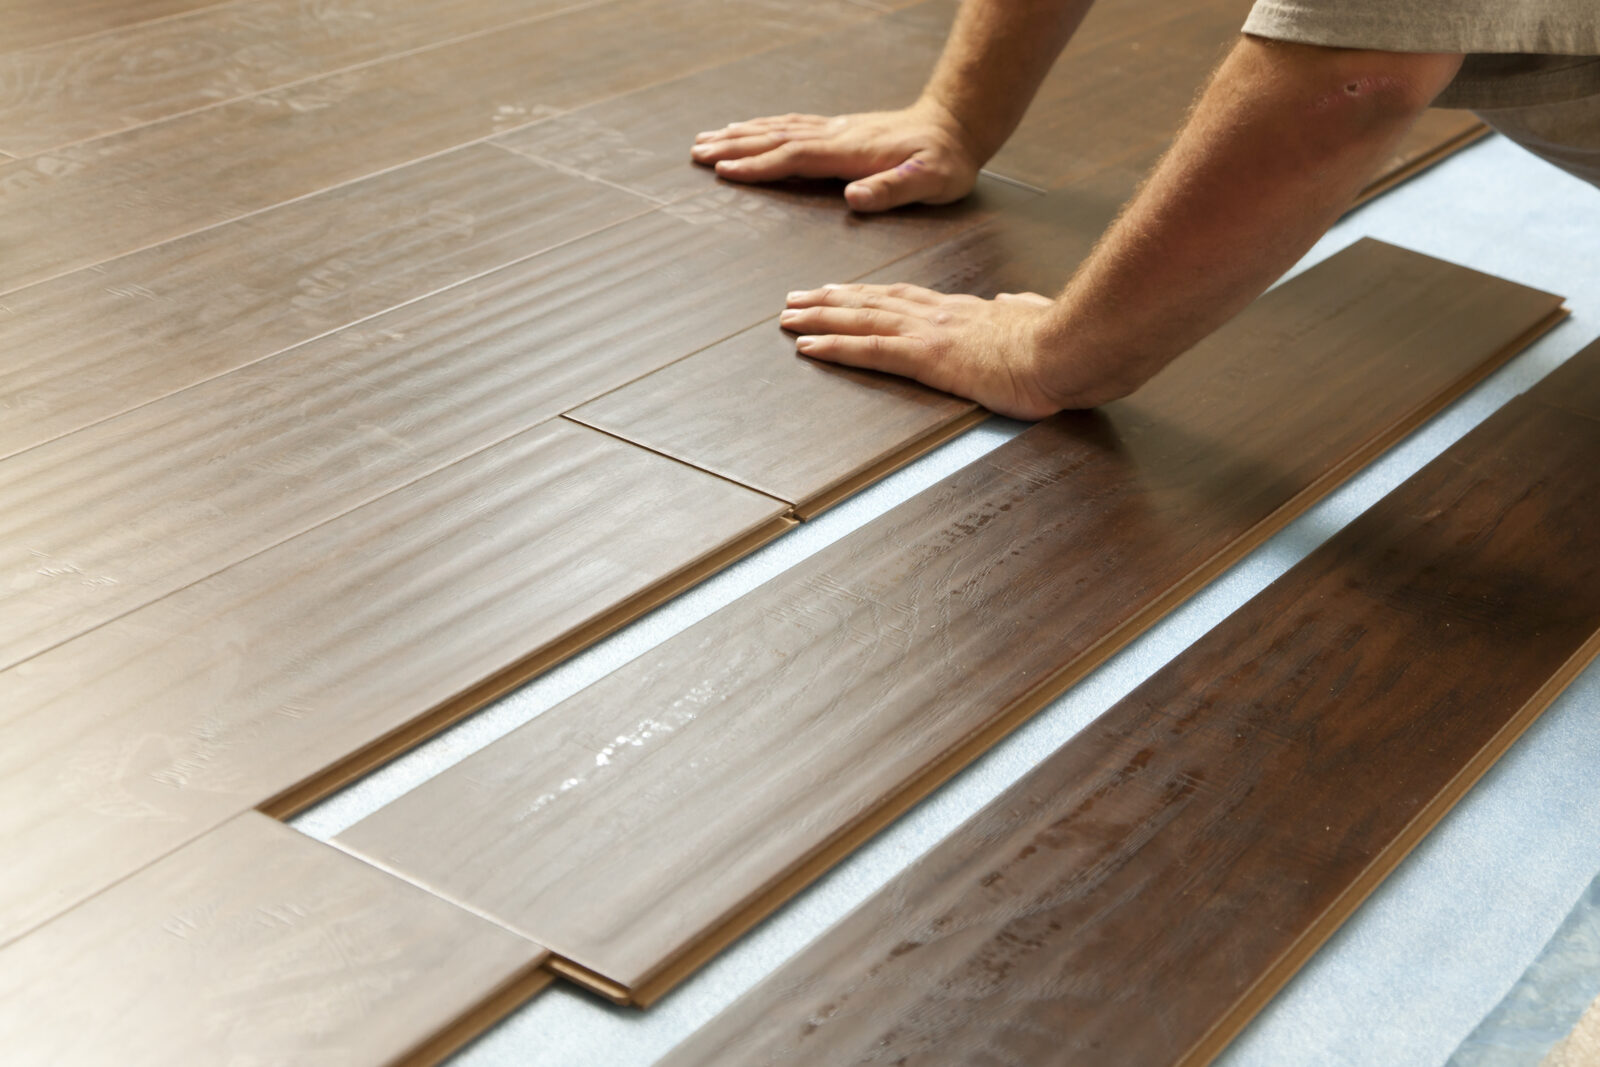 Laminate Flooring In Los Angeles Ca, How Much For New Laminate Flooring